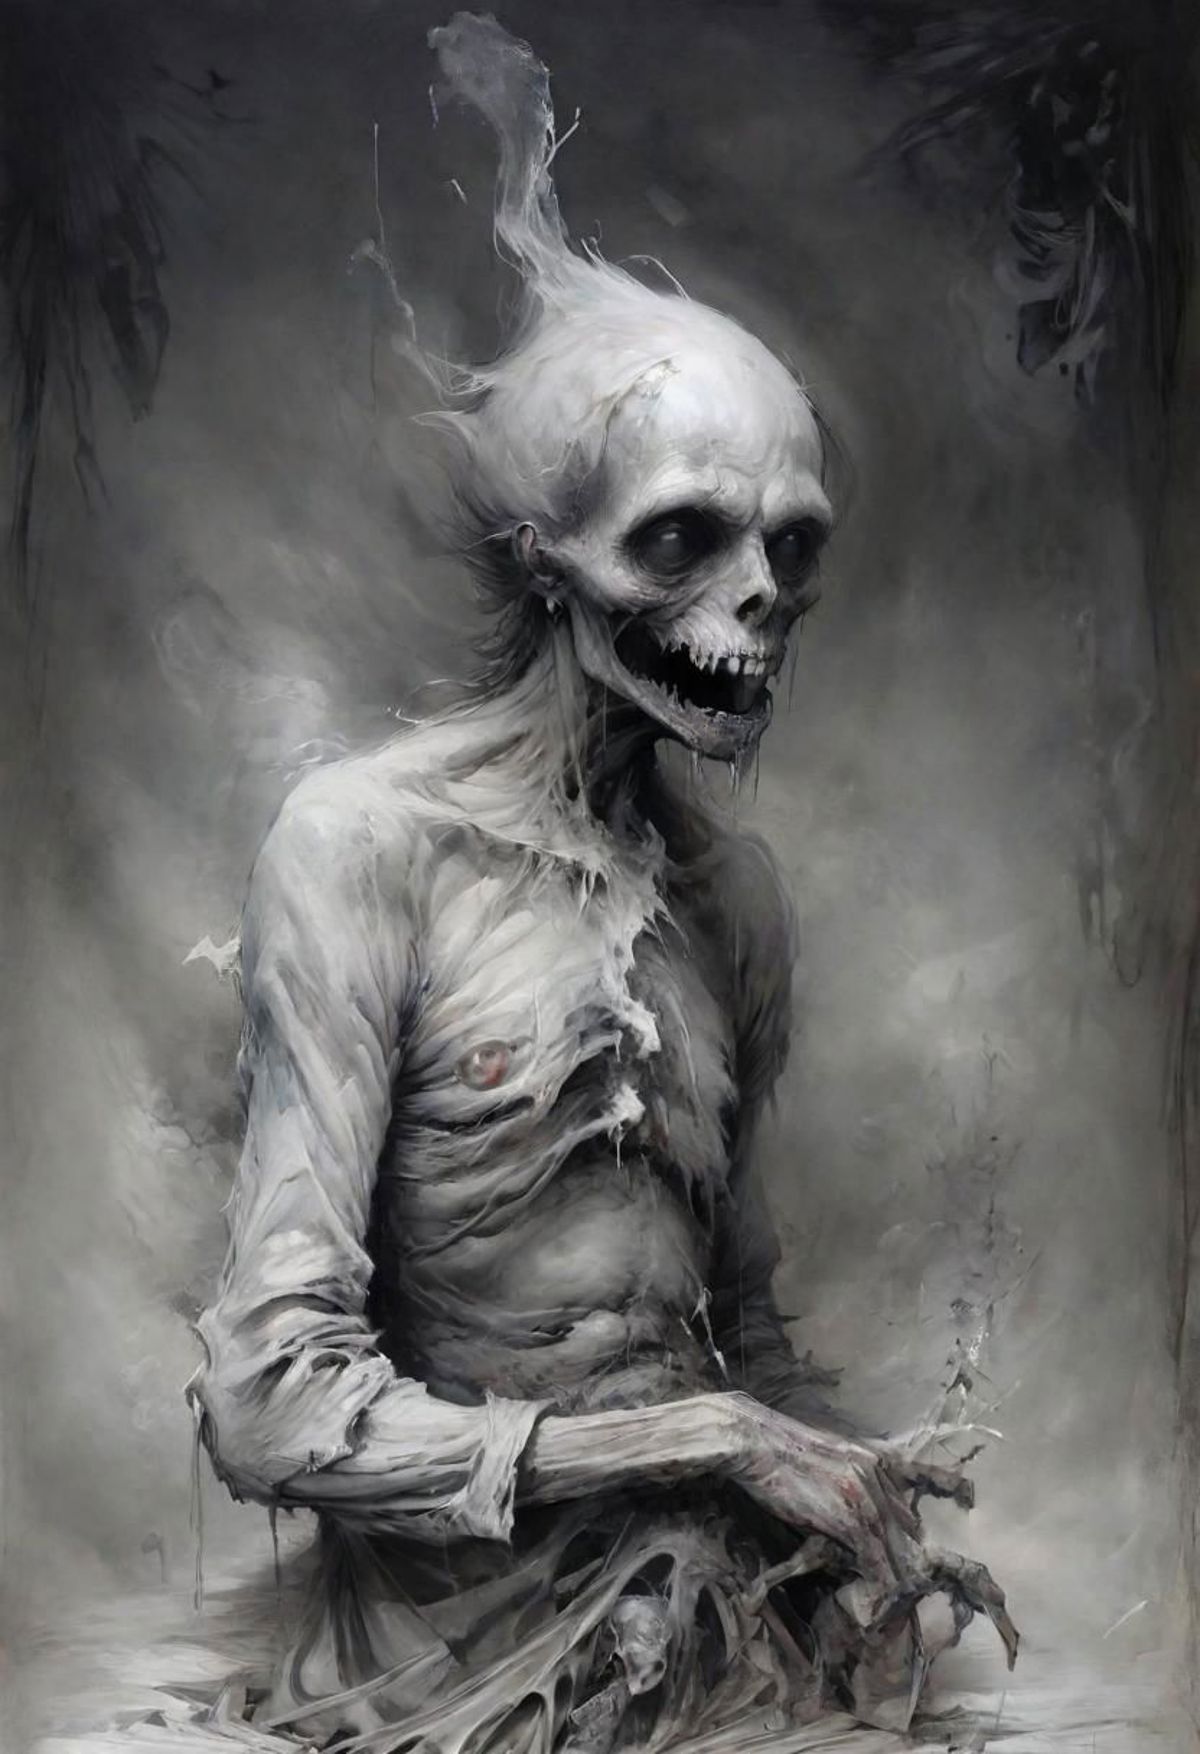 A Skull with a Skeletal Body Sitting in a Dark and Misty Environment